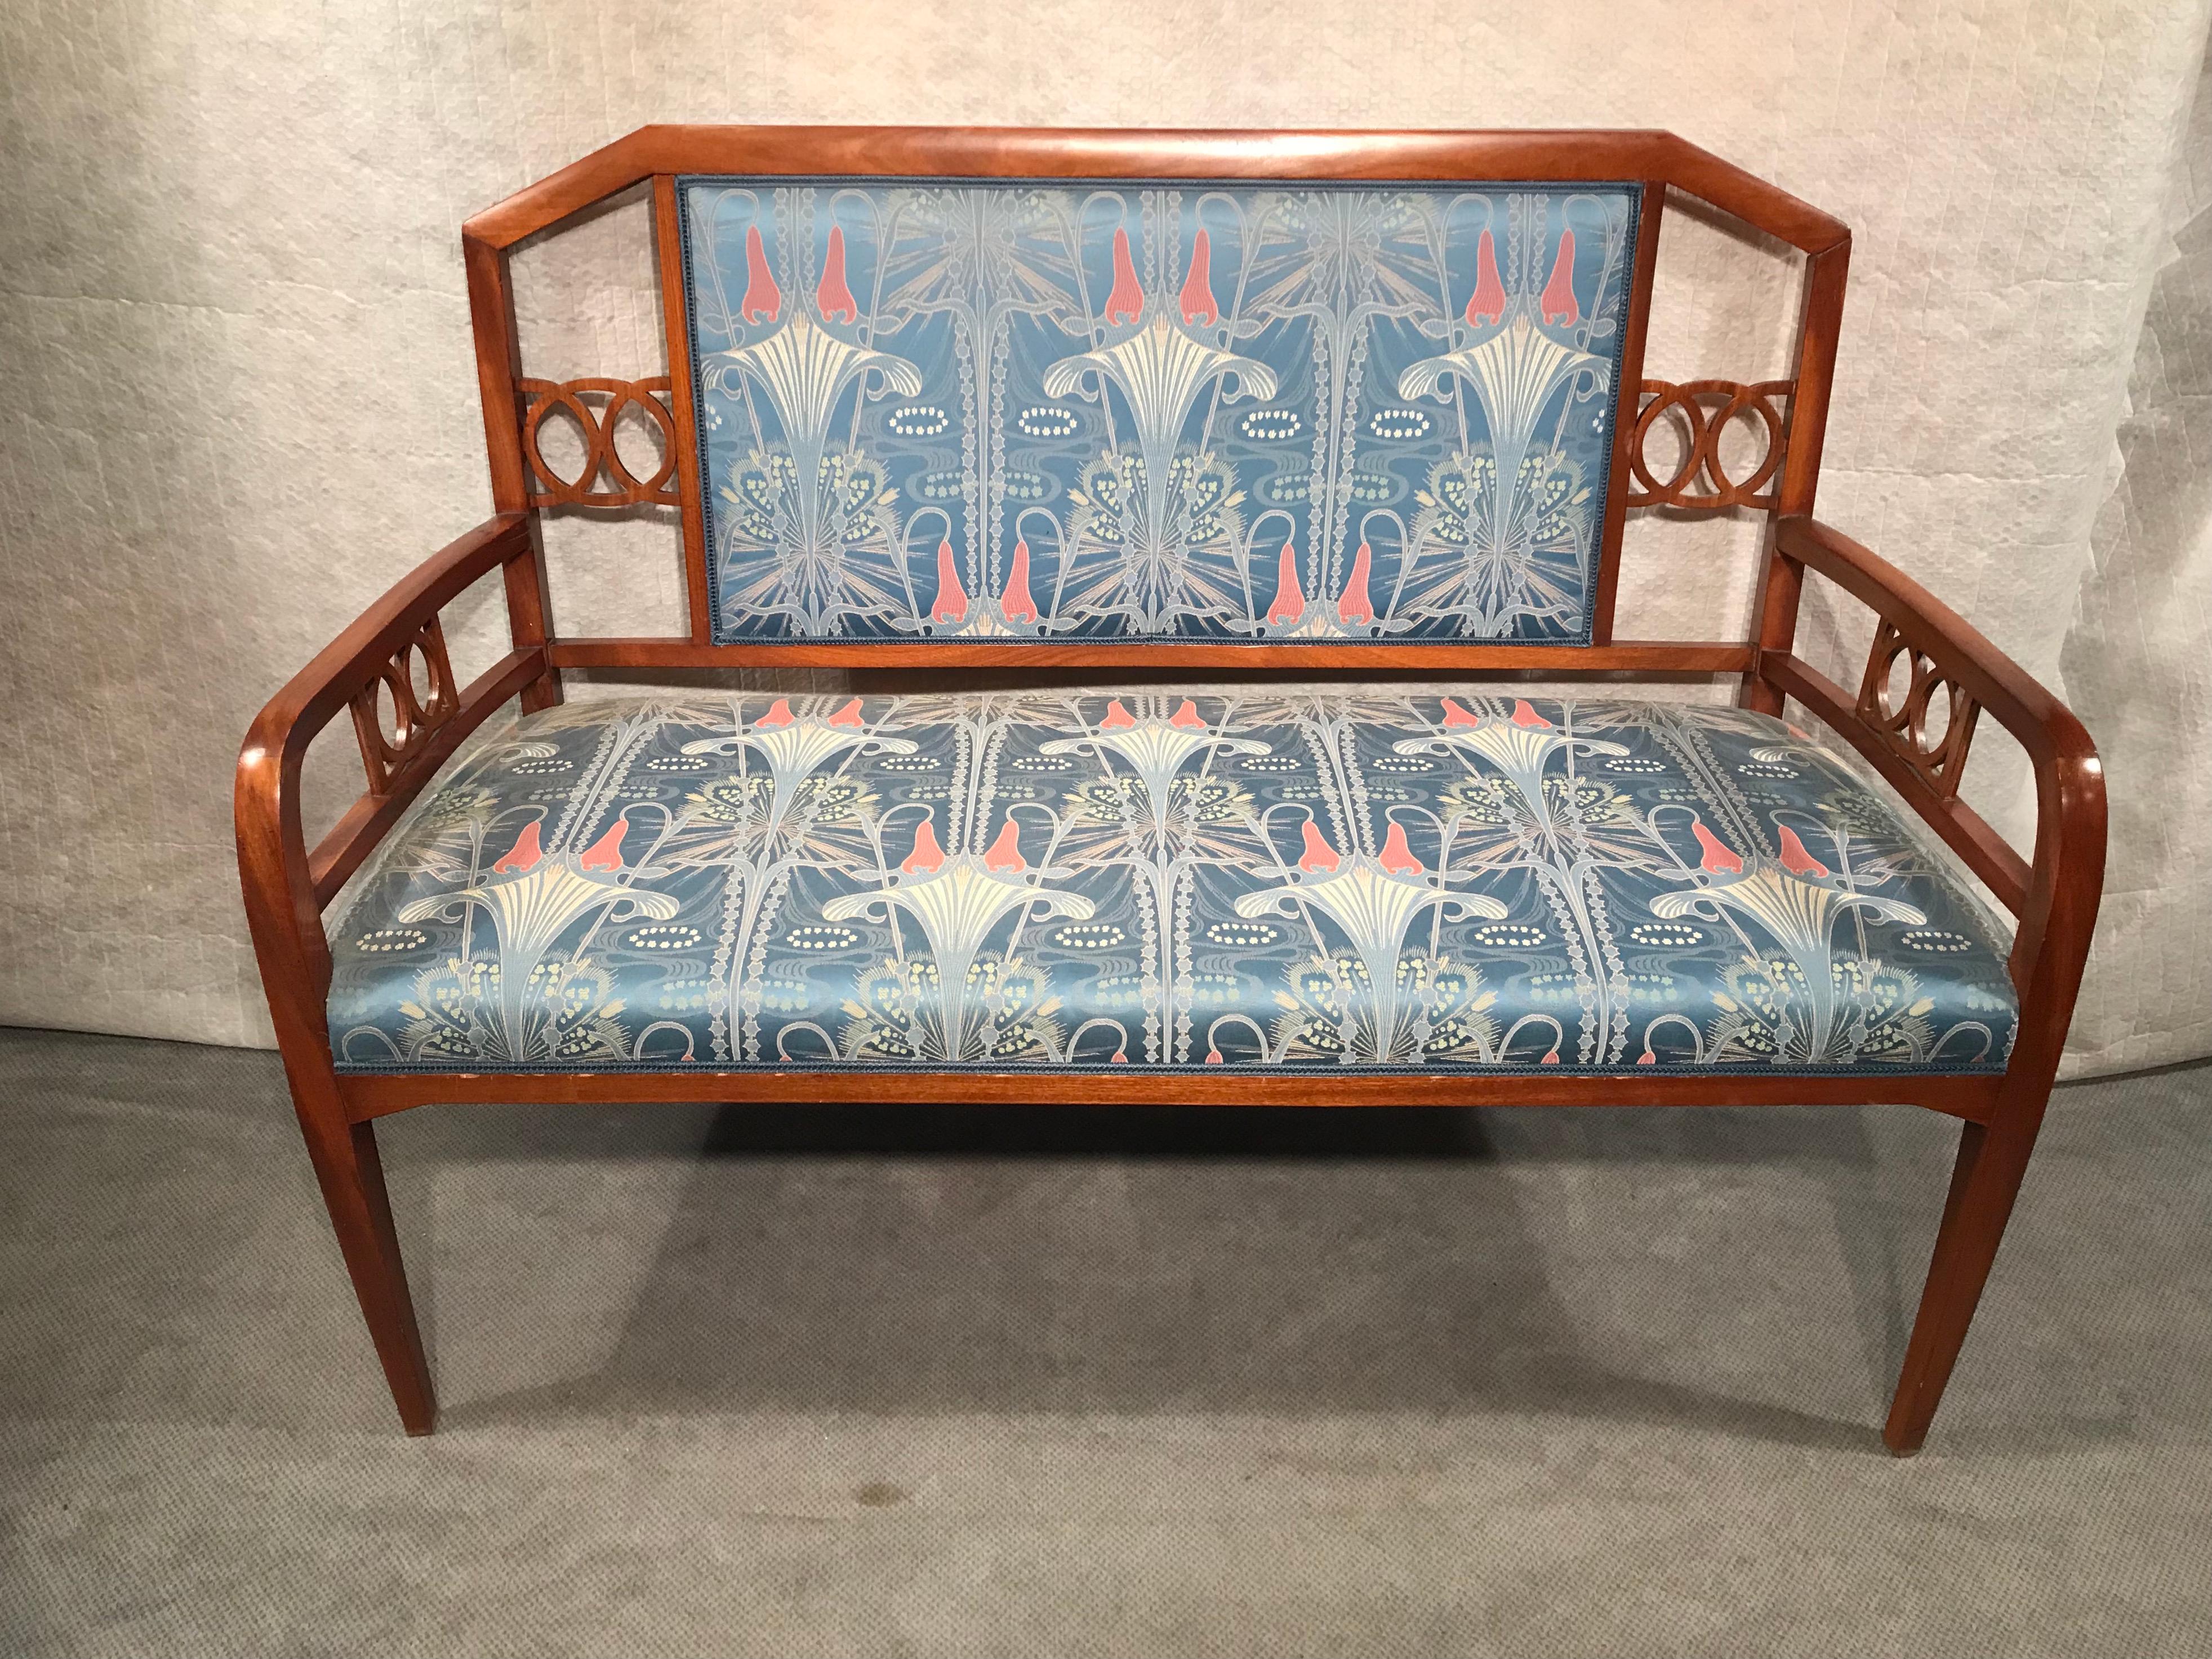 This beautiful Art Nouveau Salon Suite dates back to around 1900-10 and comes from Vienna. The set includes a bench and two armchairs. The fruitwood frame is in very good condition and has some very pretty design details. The upholstery and fabric